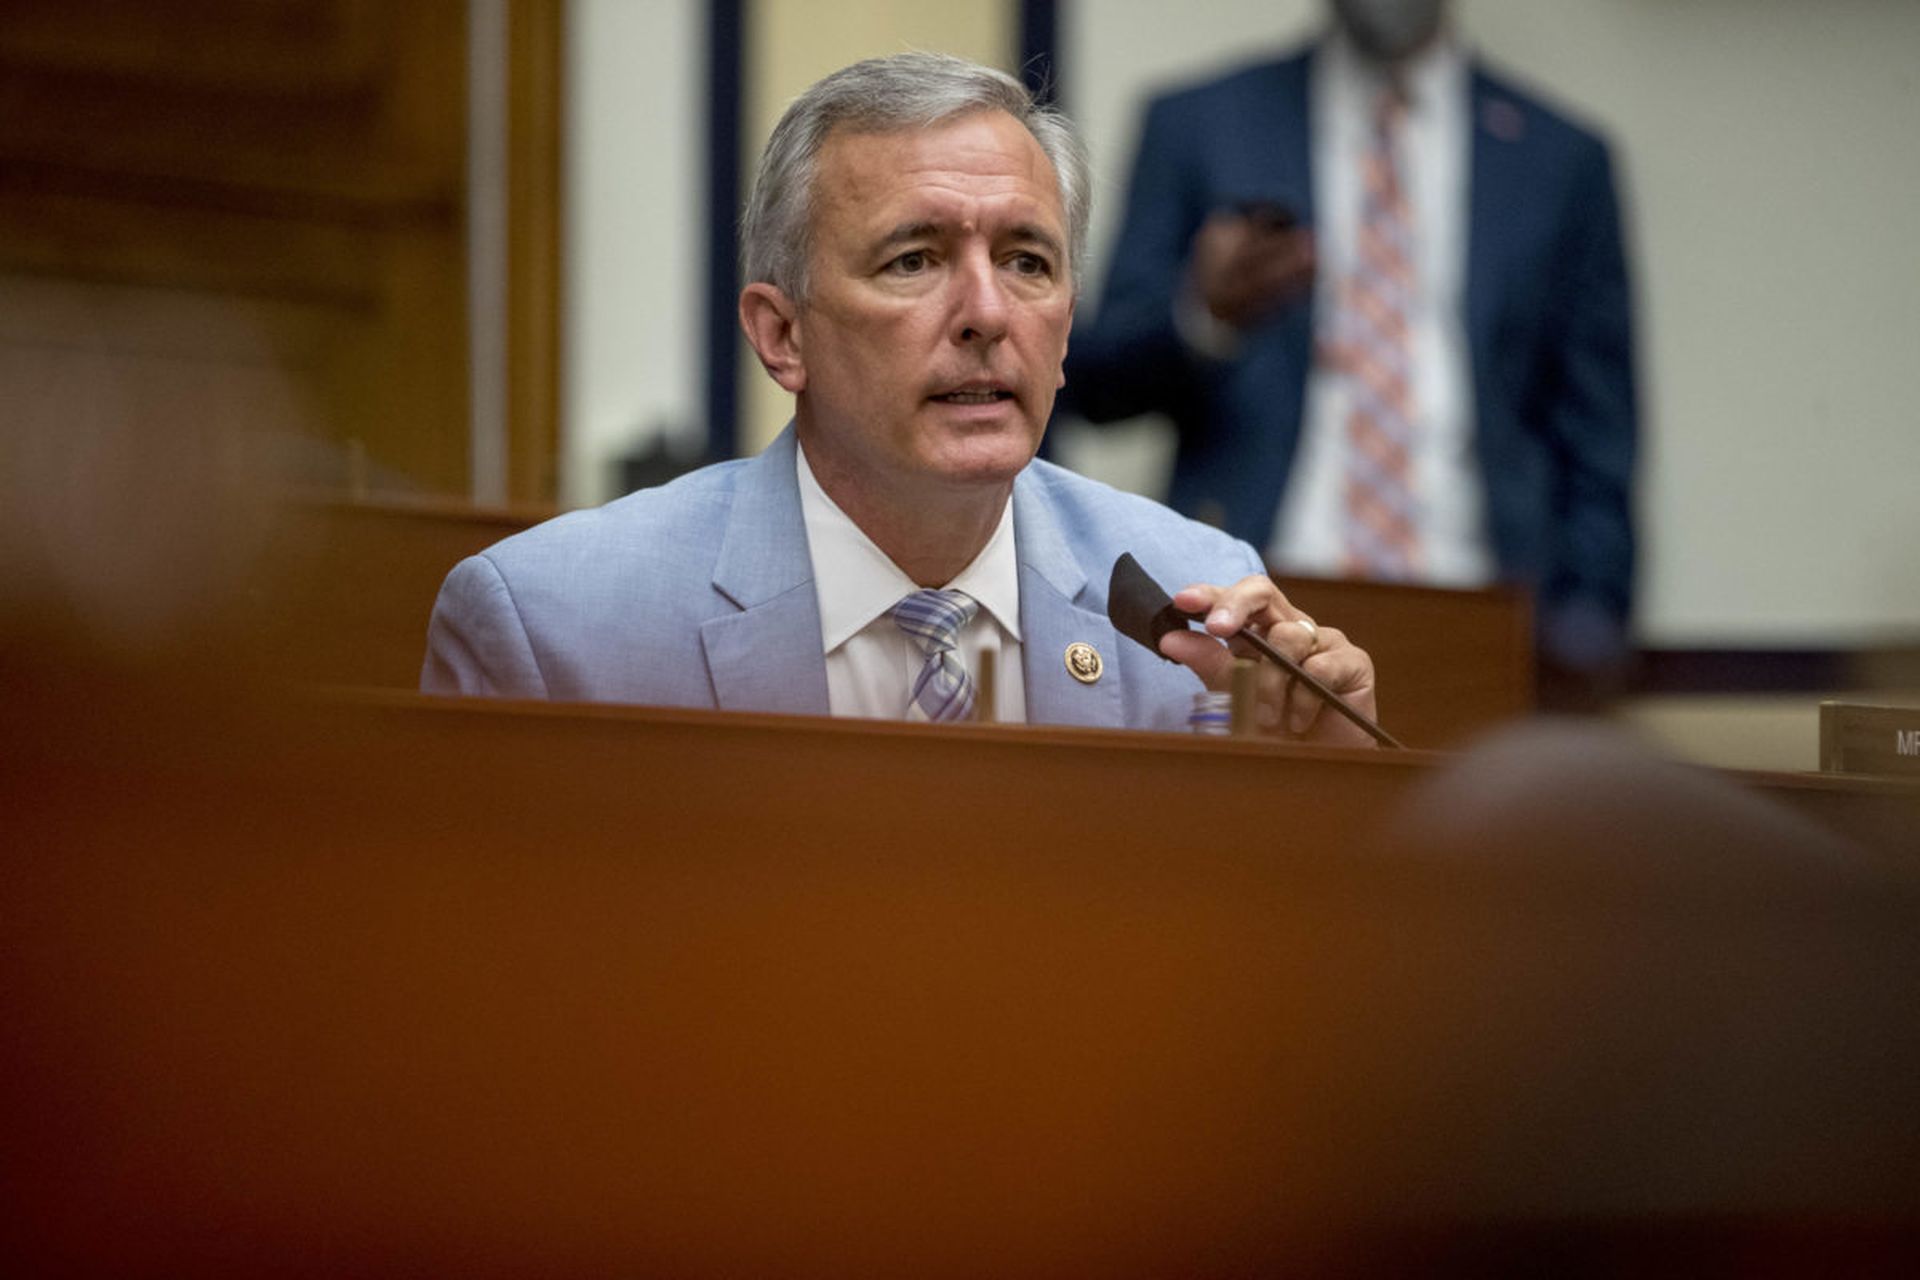 Rep. John Katko, (R-NY), questions Federal Emergency Management Agency Administrator Peter Gaynor as he testifies before a House Committee on Homeland Security meeting on Capitol Hill, July 22, 2020 in Washington, DC. He and Rep. Abigail Spanberger, D-Va, introduced legislation that would define &#8220;systemically important&#8221; parts of critica...